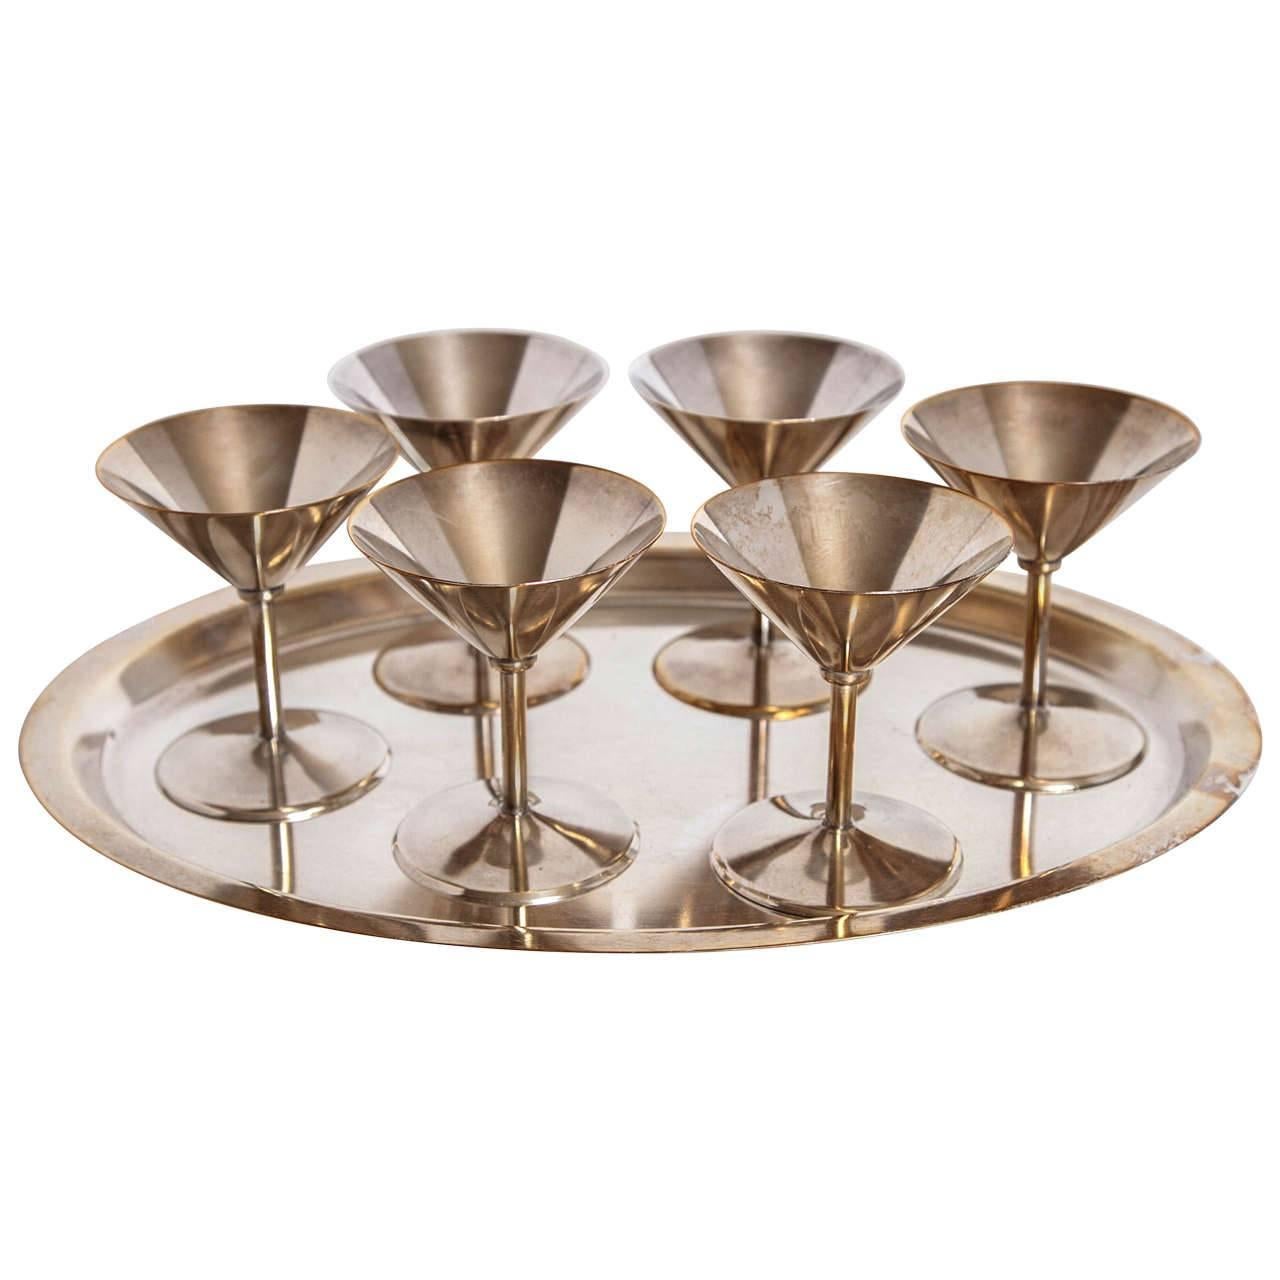 Art Deco Silver Plate Cocktail Set by WMF Germany